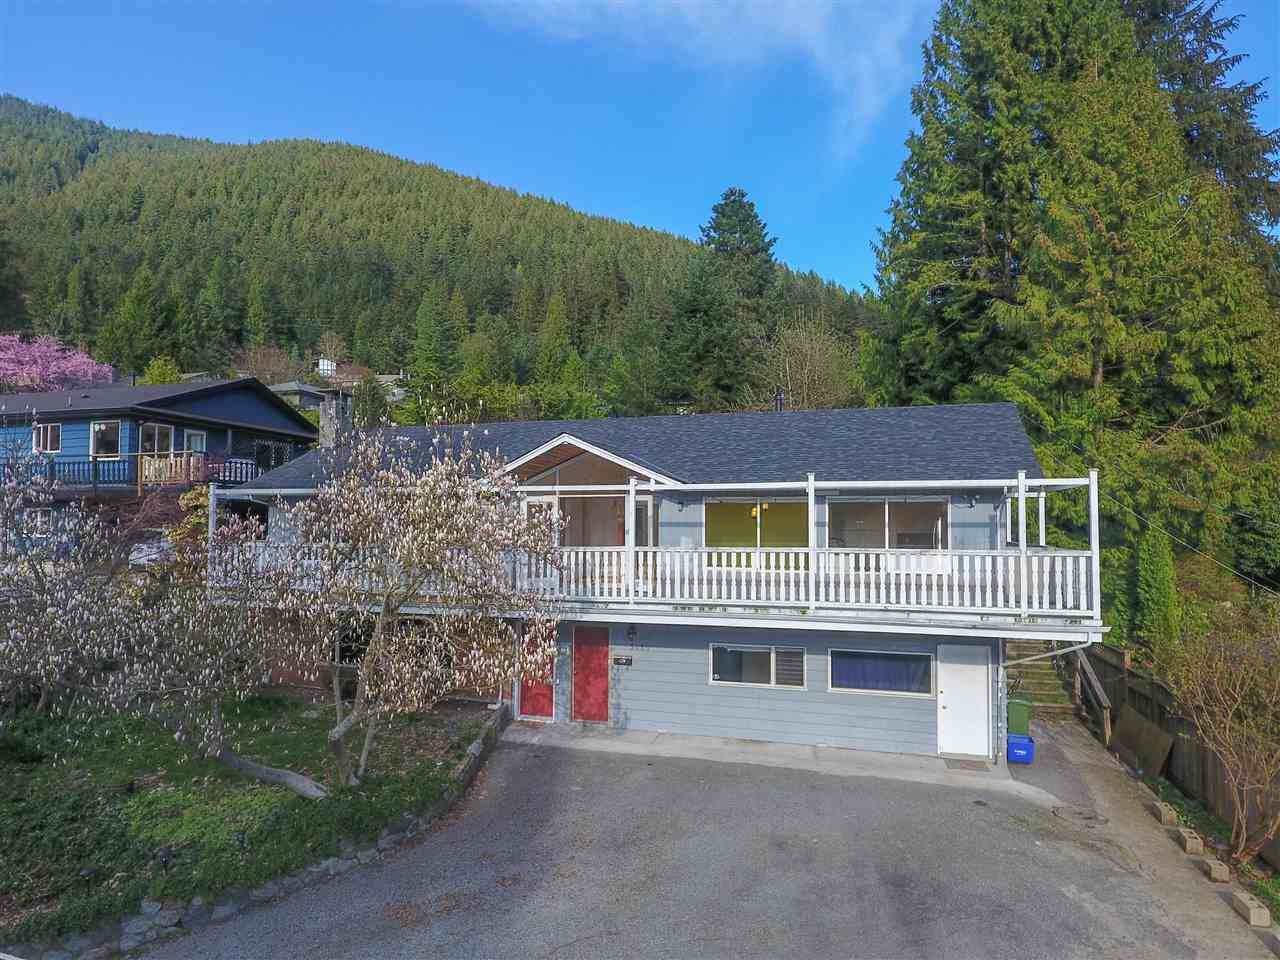 Main Photo: 5050 RANGER AVENUE in North Vancouver: Canyon Heights NV House for sale : MLS®# R2157779